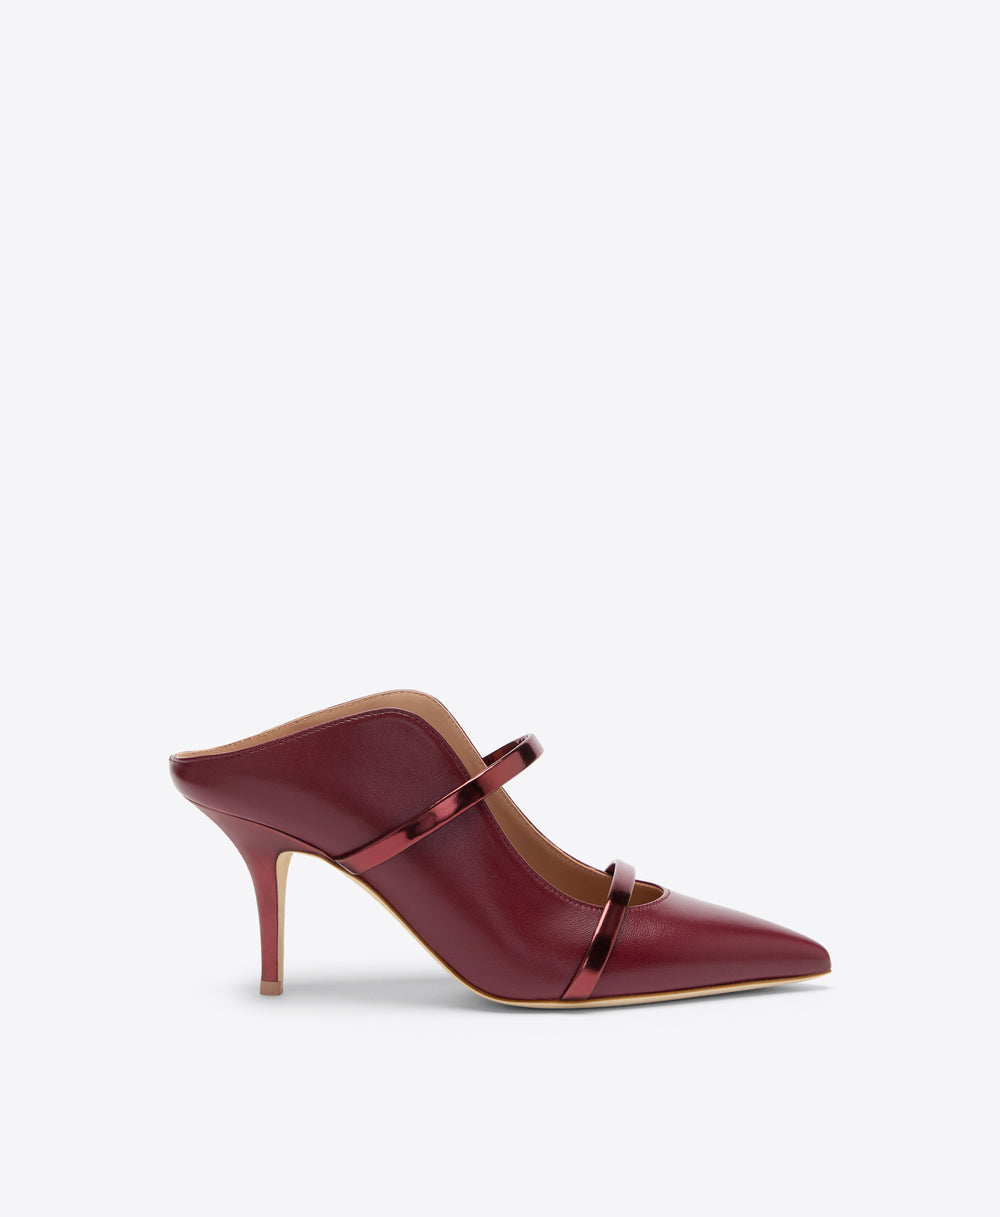 Maureen 70 Rosewood Leather Mules with Straps Malone Souliers